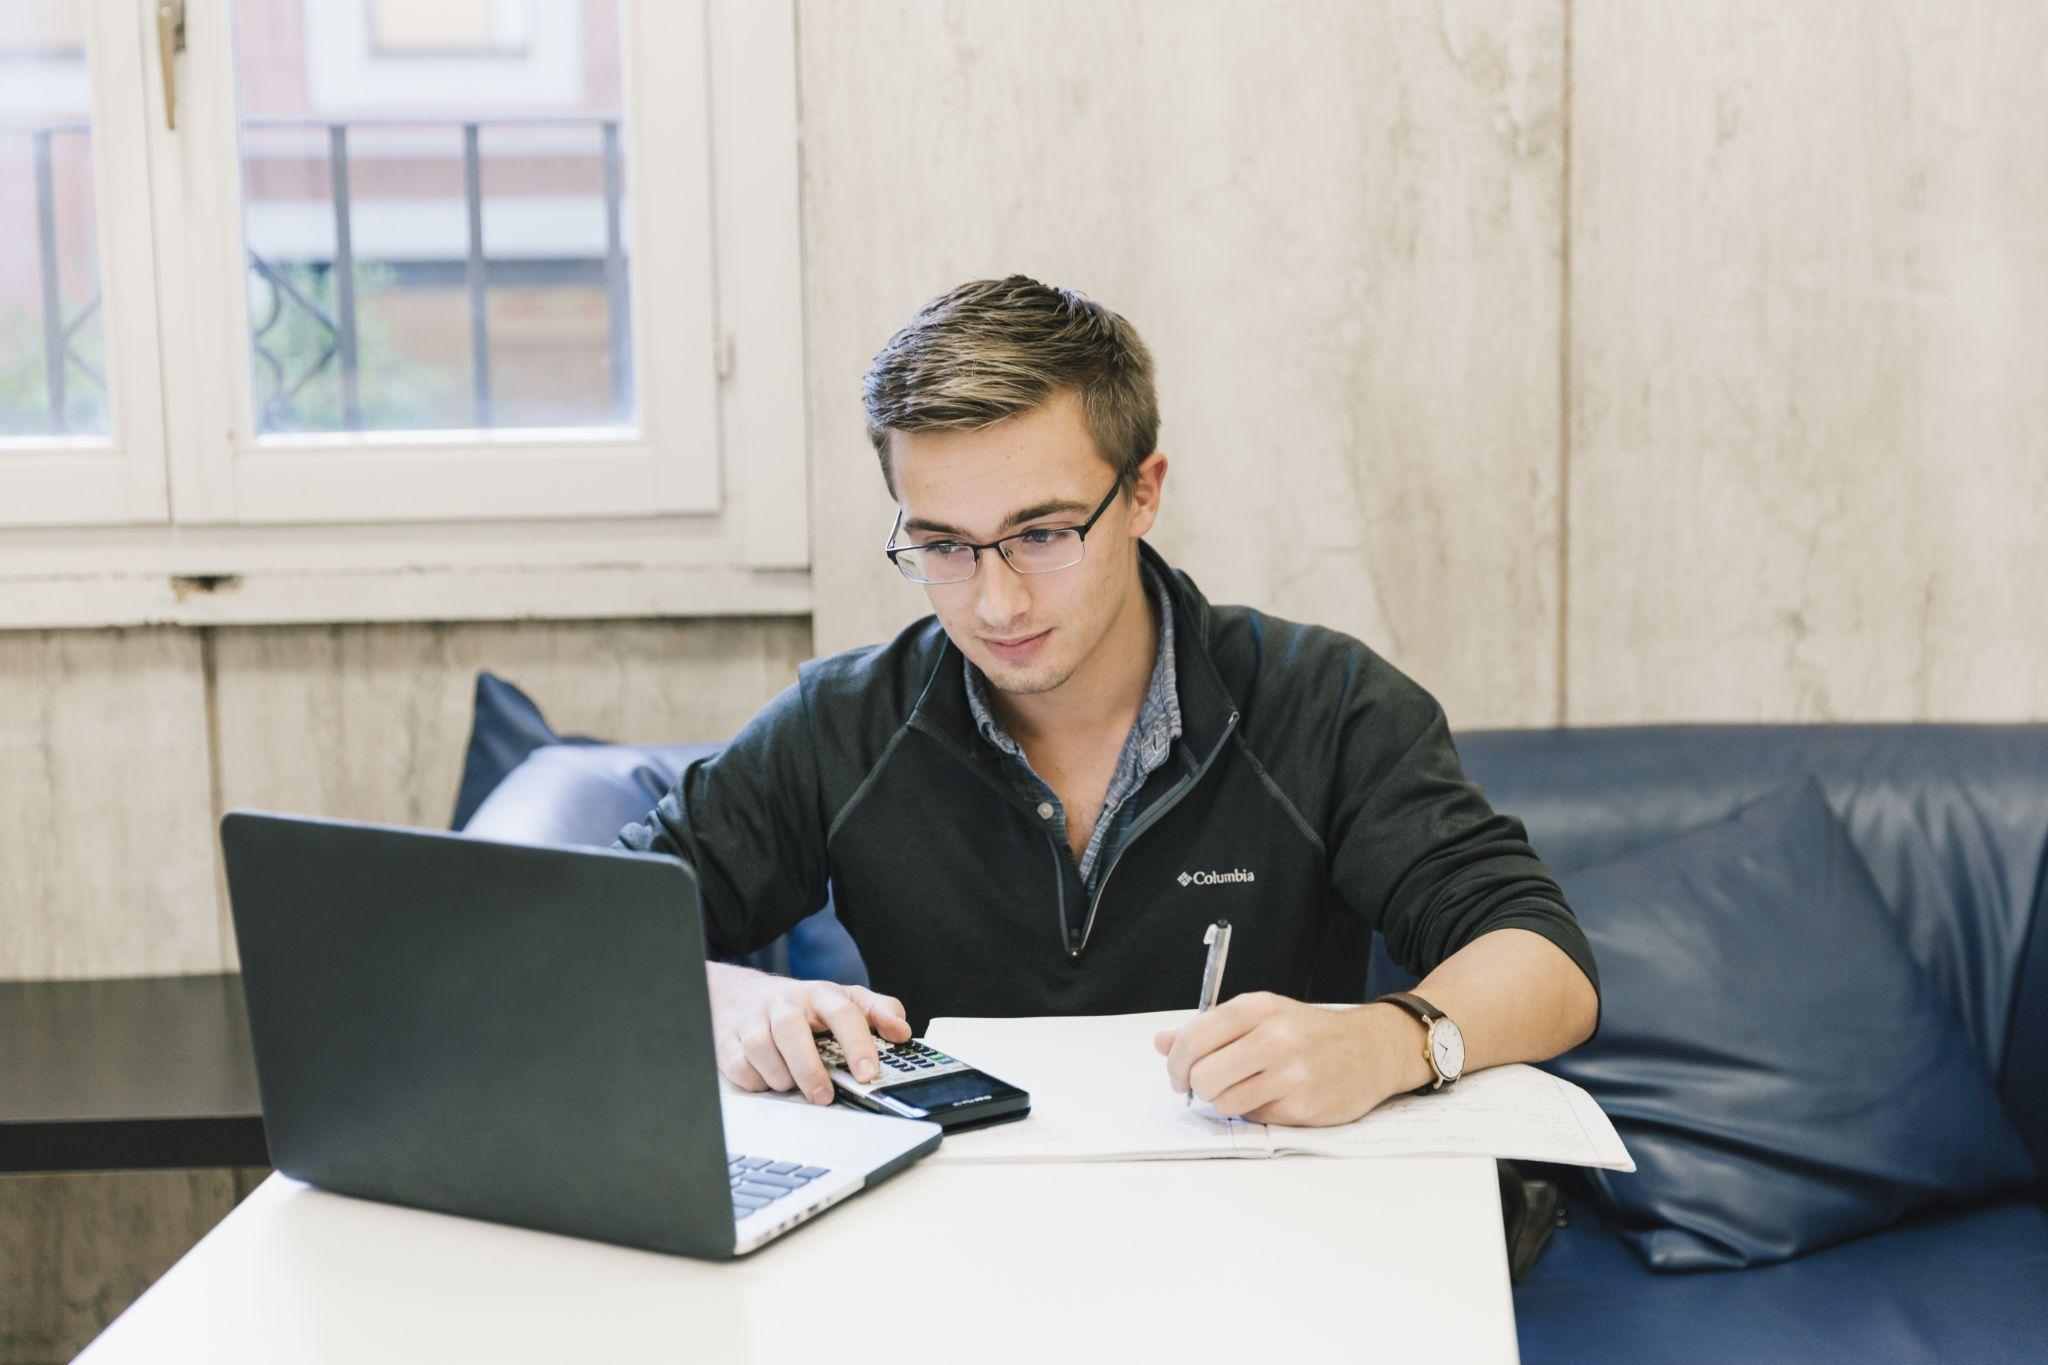 JCU student studying using a laptop and calculator